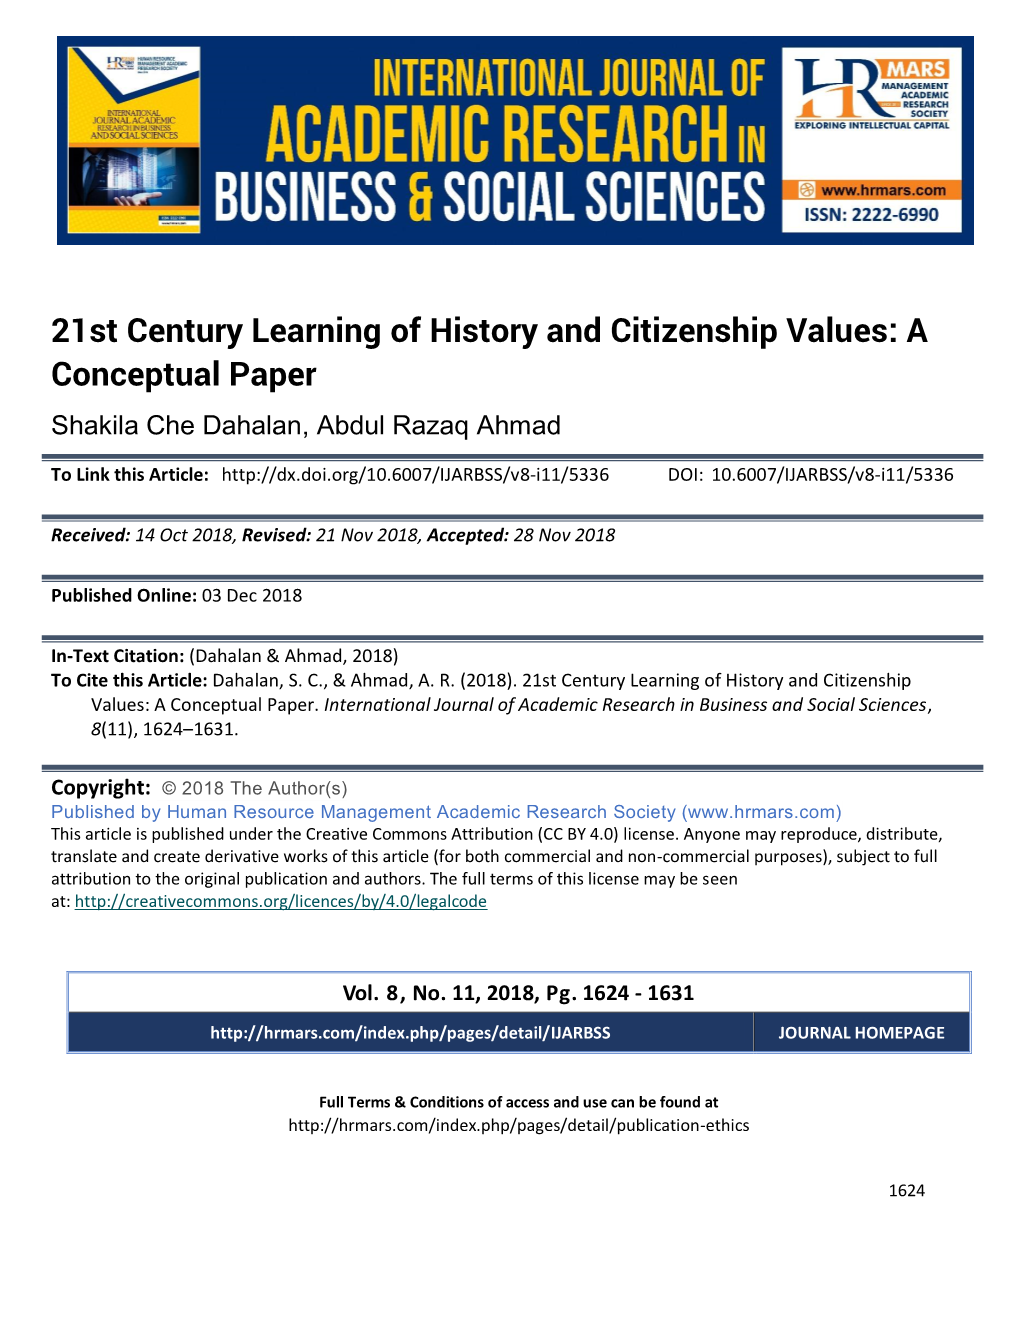 21St Century Learning of History and Citizenship Values: a Conceptual Paper